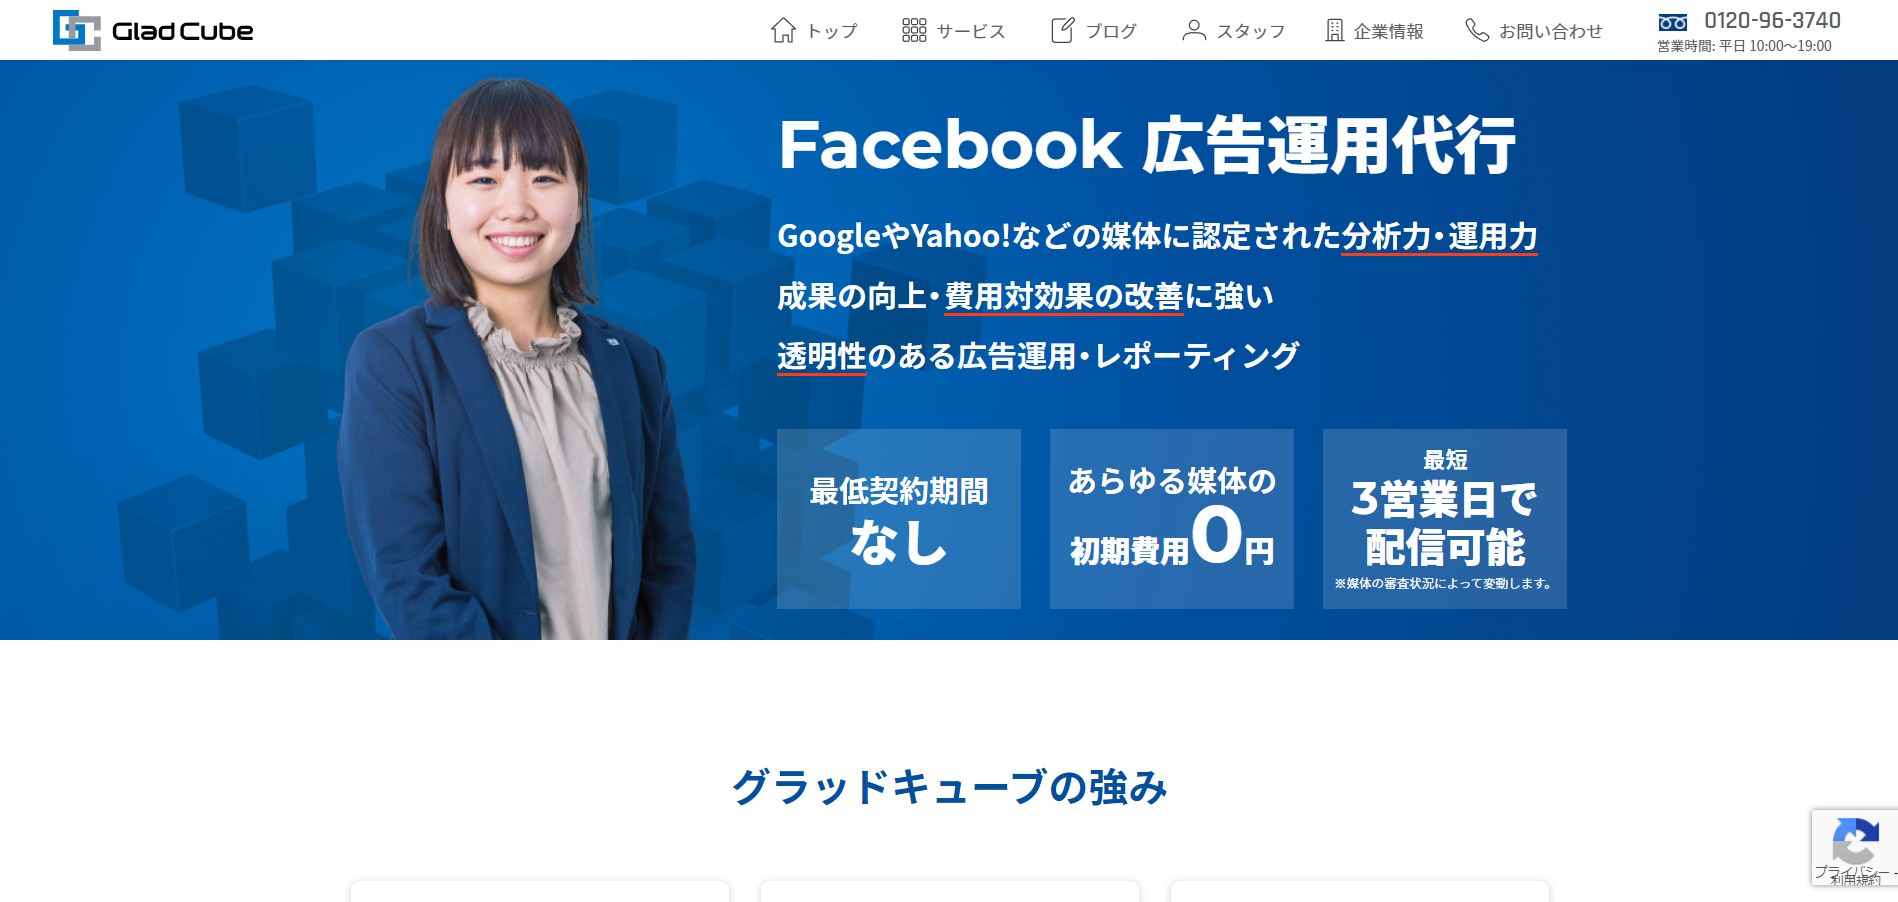 Facebook広告 運用代行 _ 株式会社グラッドキューブ